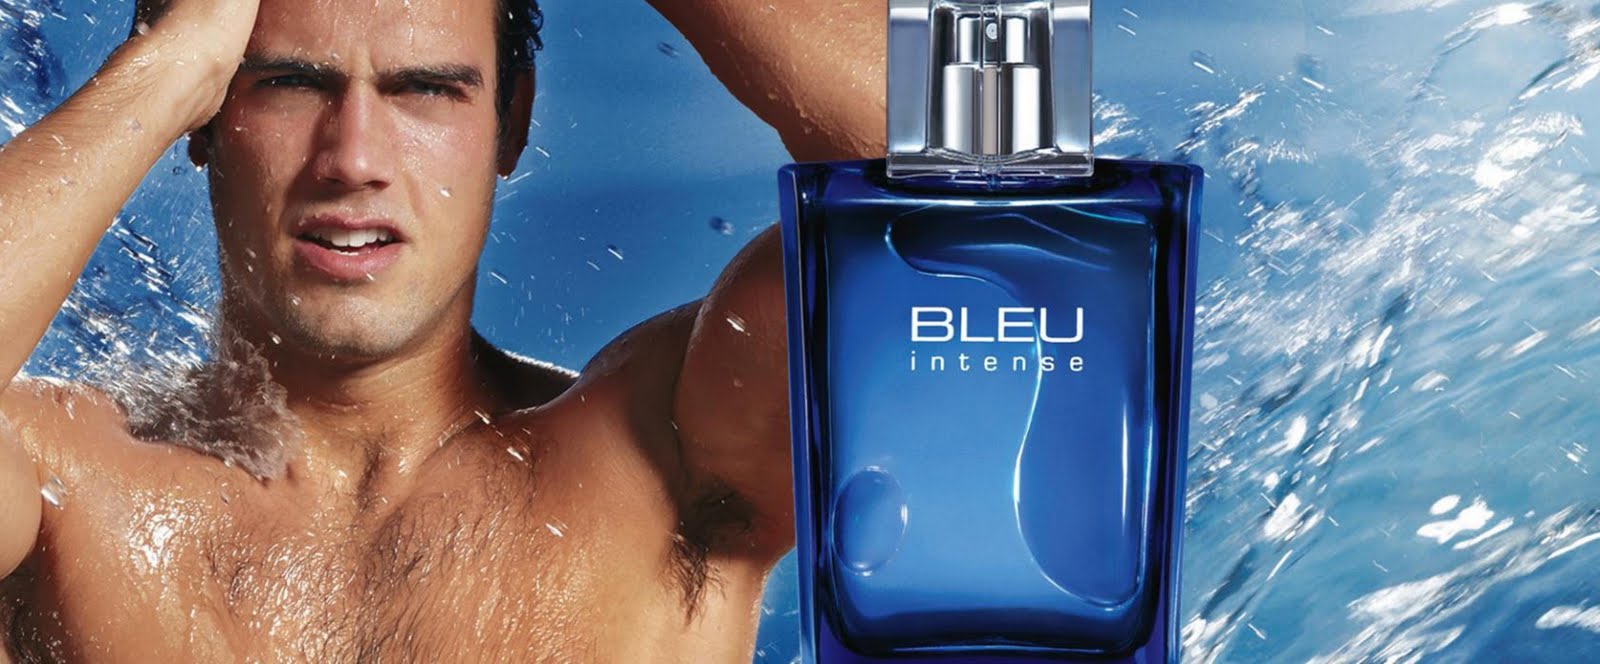 fake bleu de chanel? i'm almost 100% that it's fake but just need to know  from someone else : r/fragranceclones